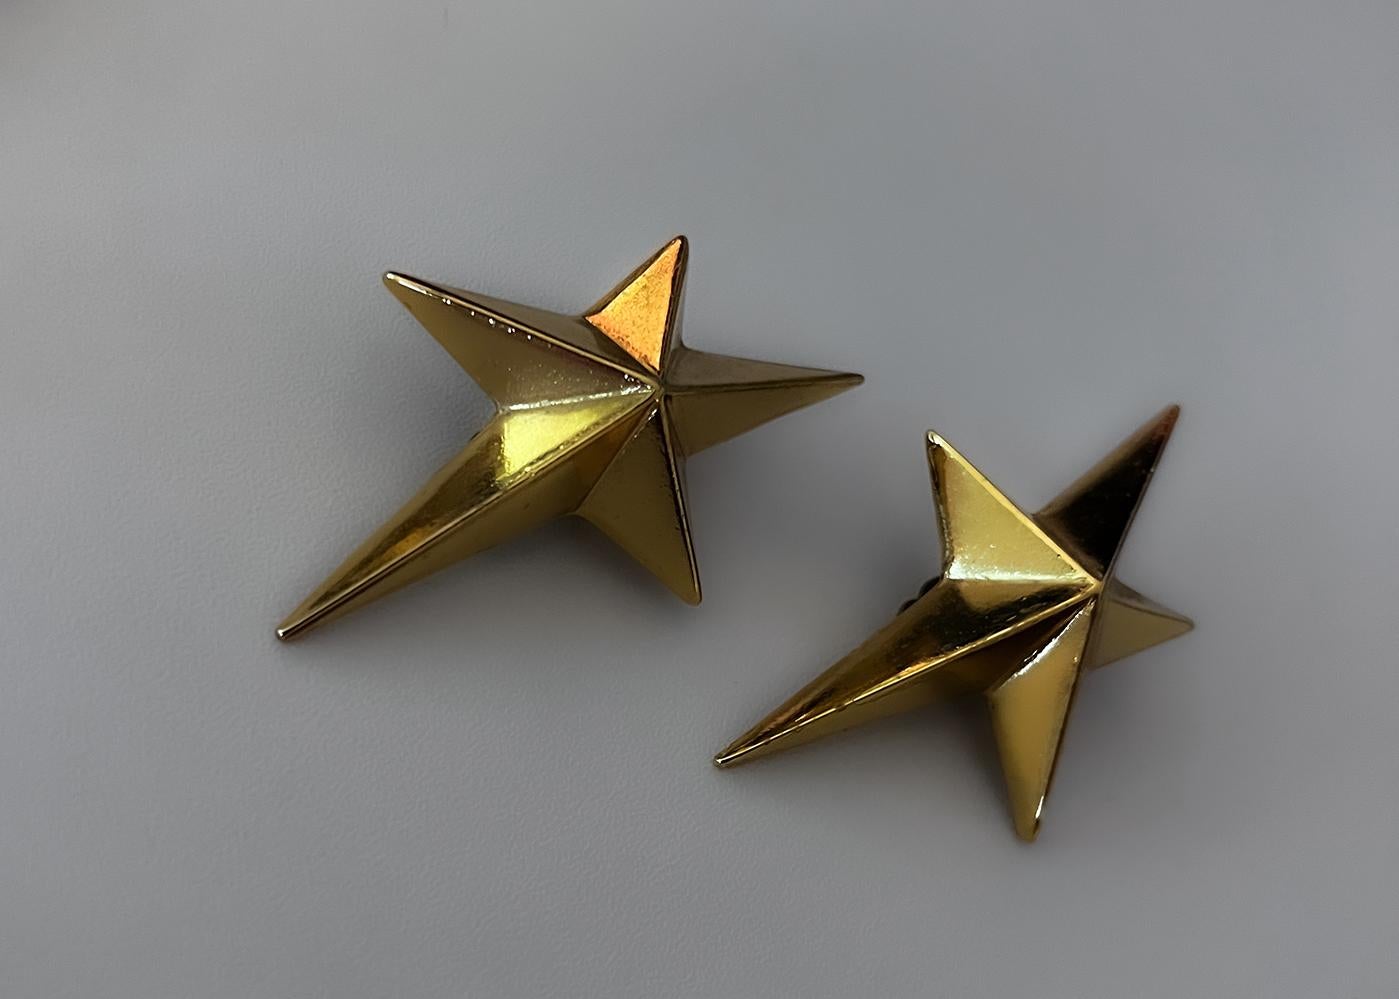 thierry mugler star necklace